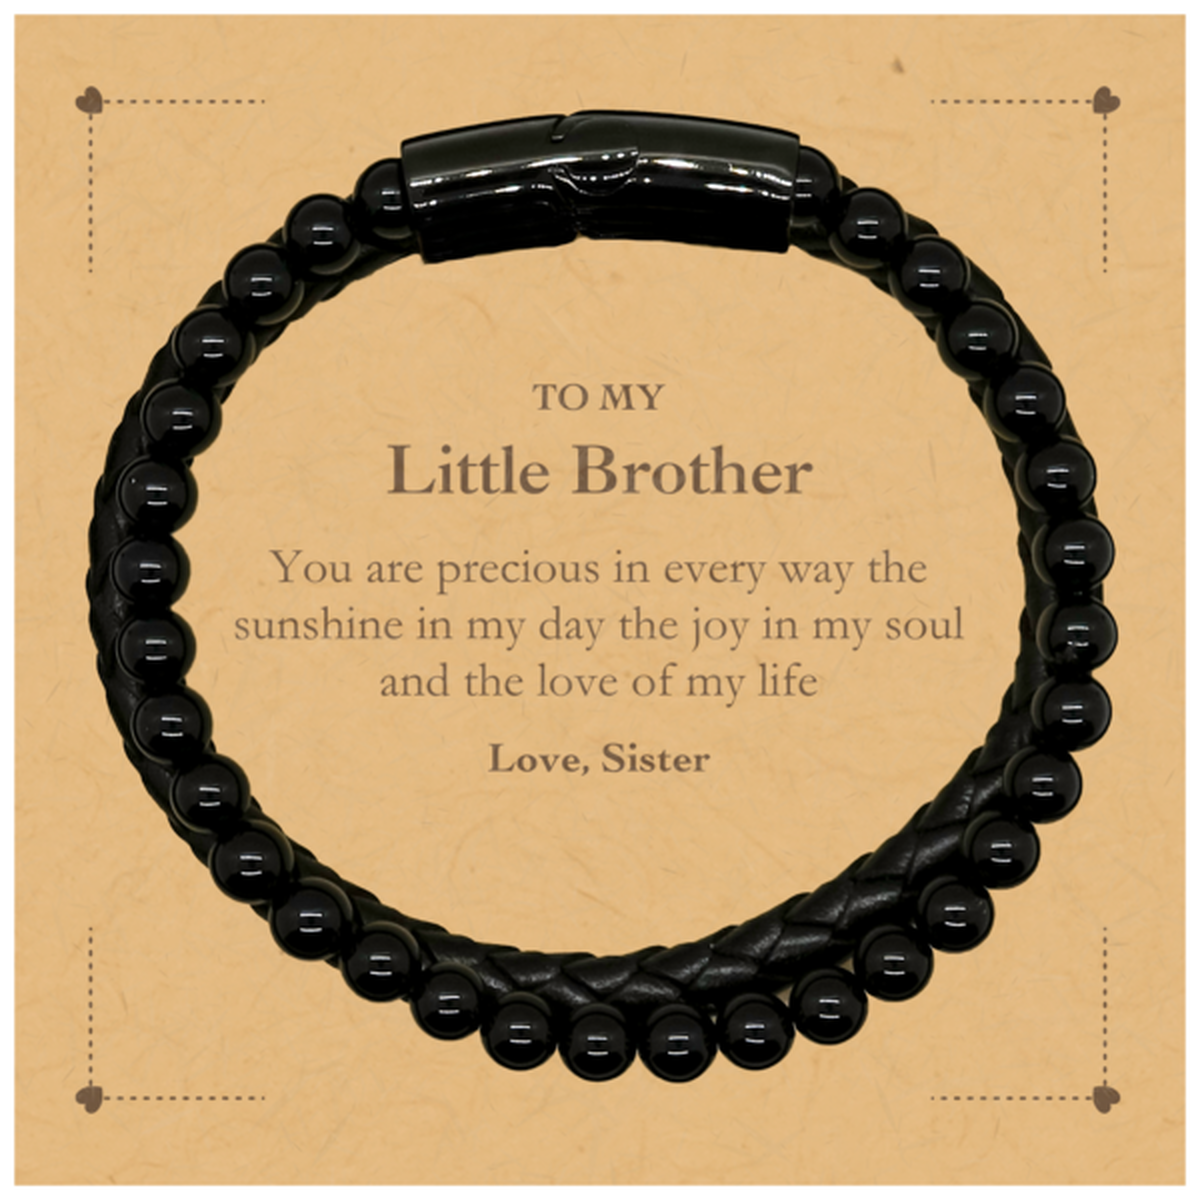 Graduation Gifts for Little Brother Stone Leather Bracelets Present from Sister, Christmas Little Brother Birthday Gifts Little Brother You are precious in every way the sunshine in my day. Love, Sister